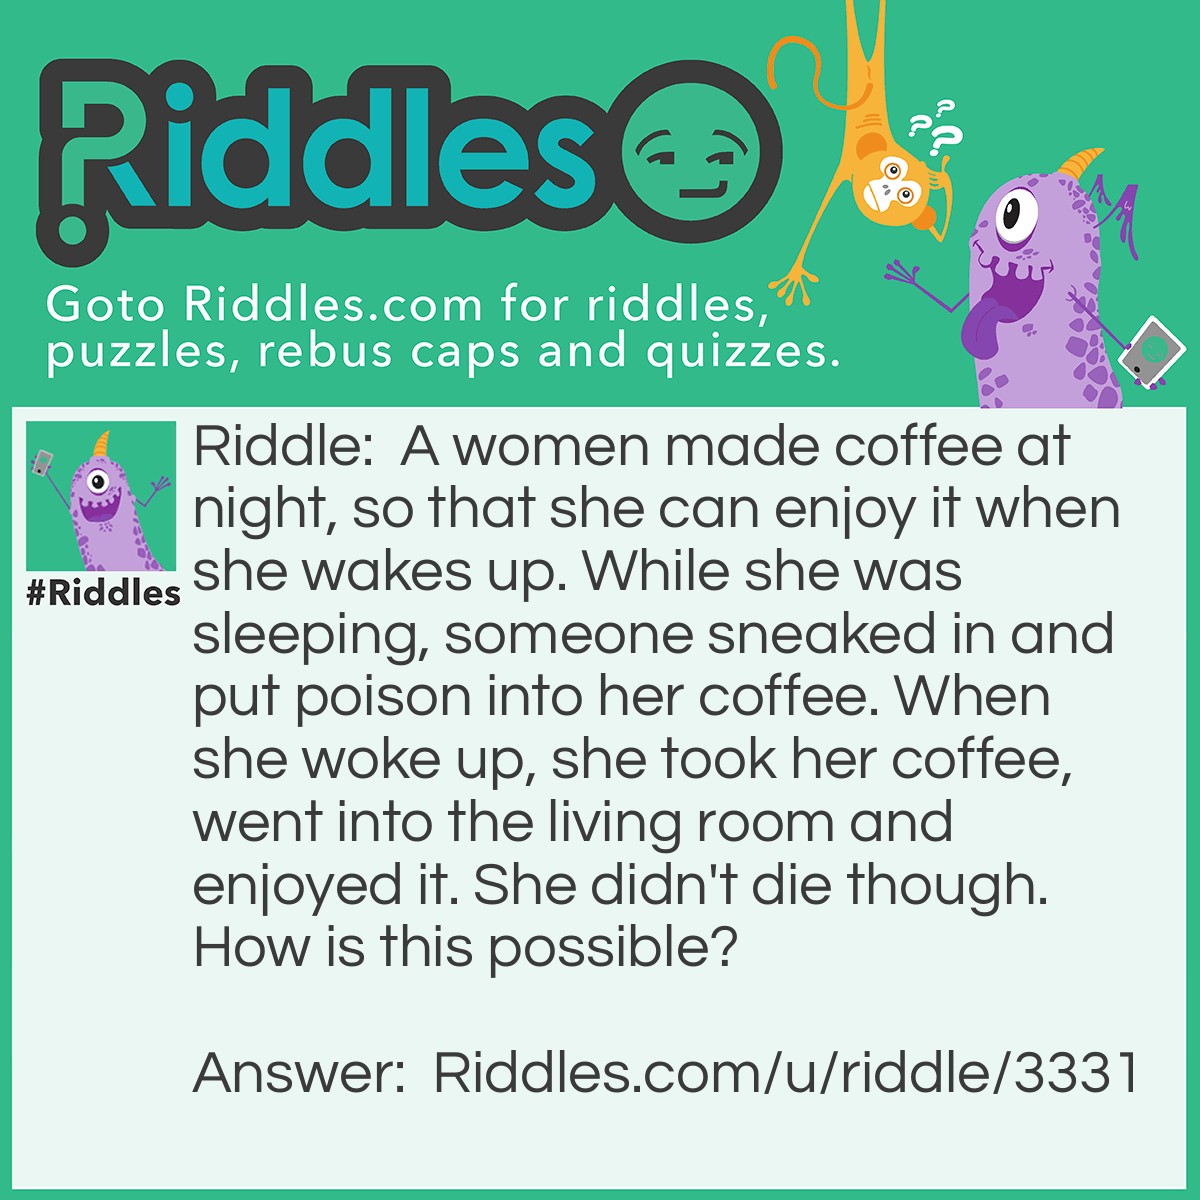 Riddle: A women made coffee at night, so that she can enjoy it when she wakes up. While she was sleeping, someone sneaked in and put poison into her coffee. When she woke up, she took her coffee, went into the living room and enjoyed it. She didn't die though. How is this possible? Answer: She drank her coffee in the LIVING room.